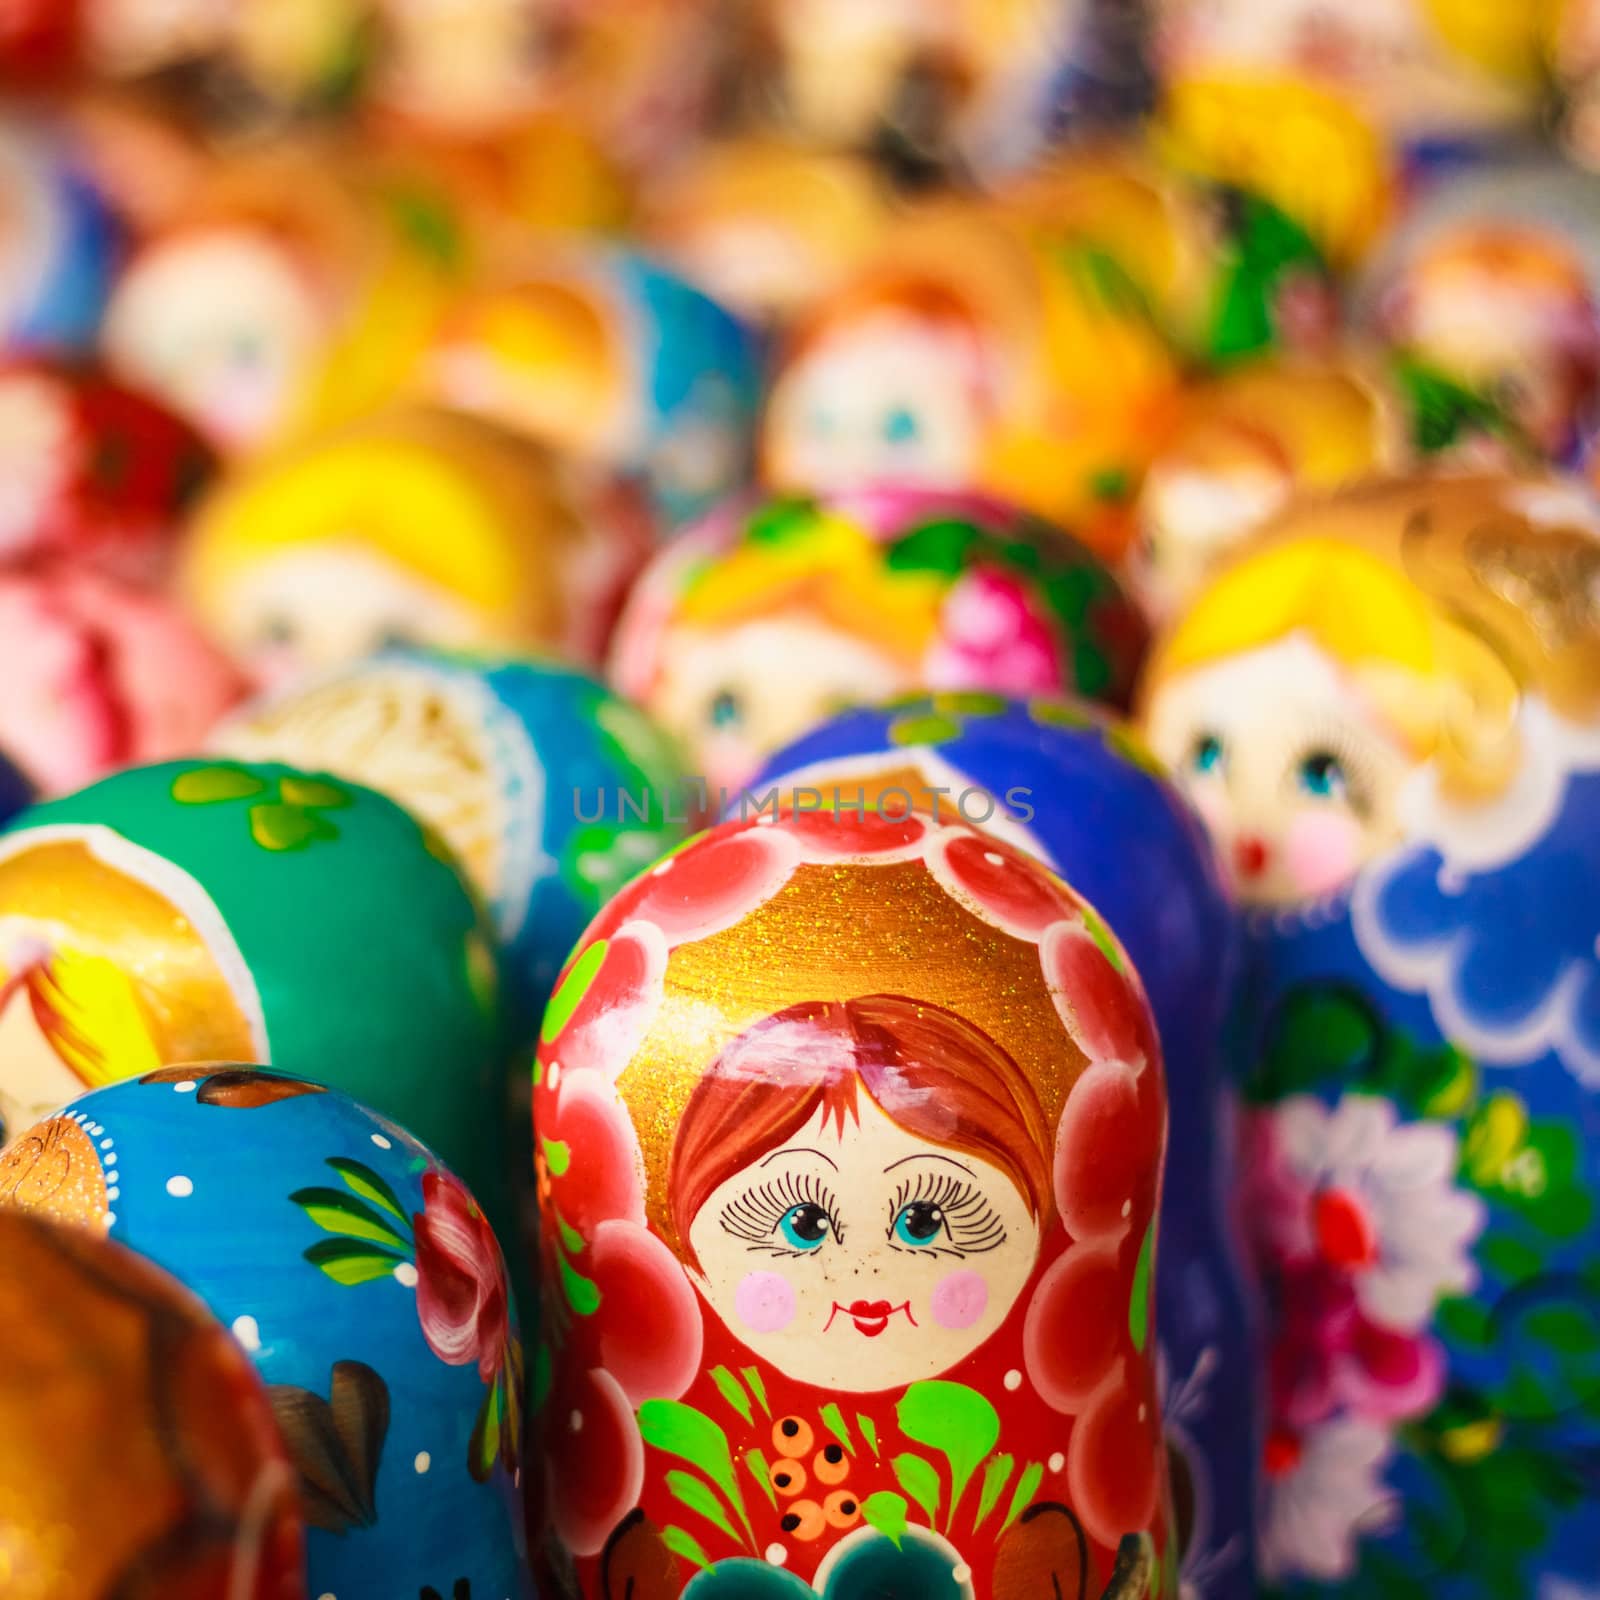 Colorful Russian nesting dolls at the market by ryhor